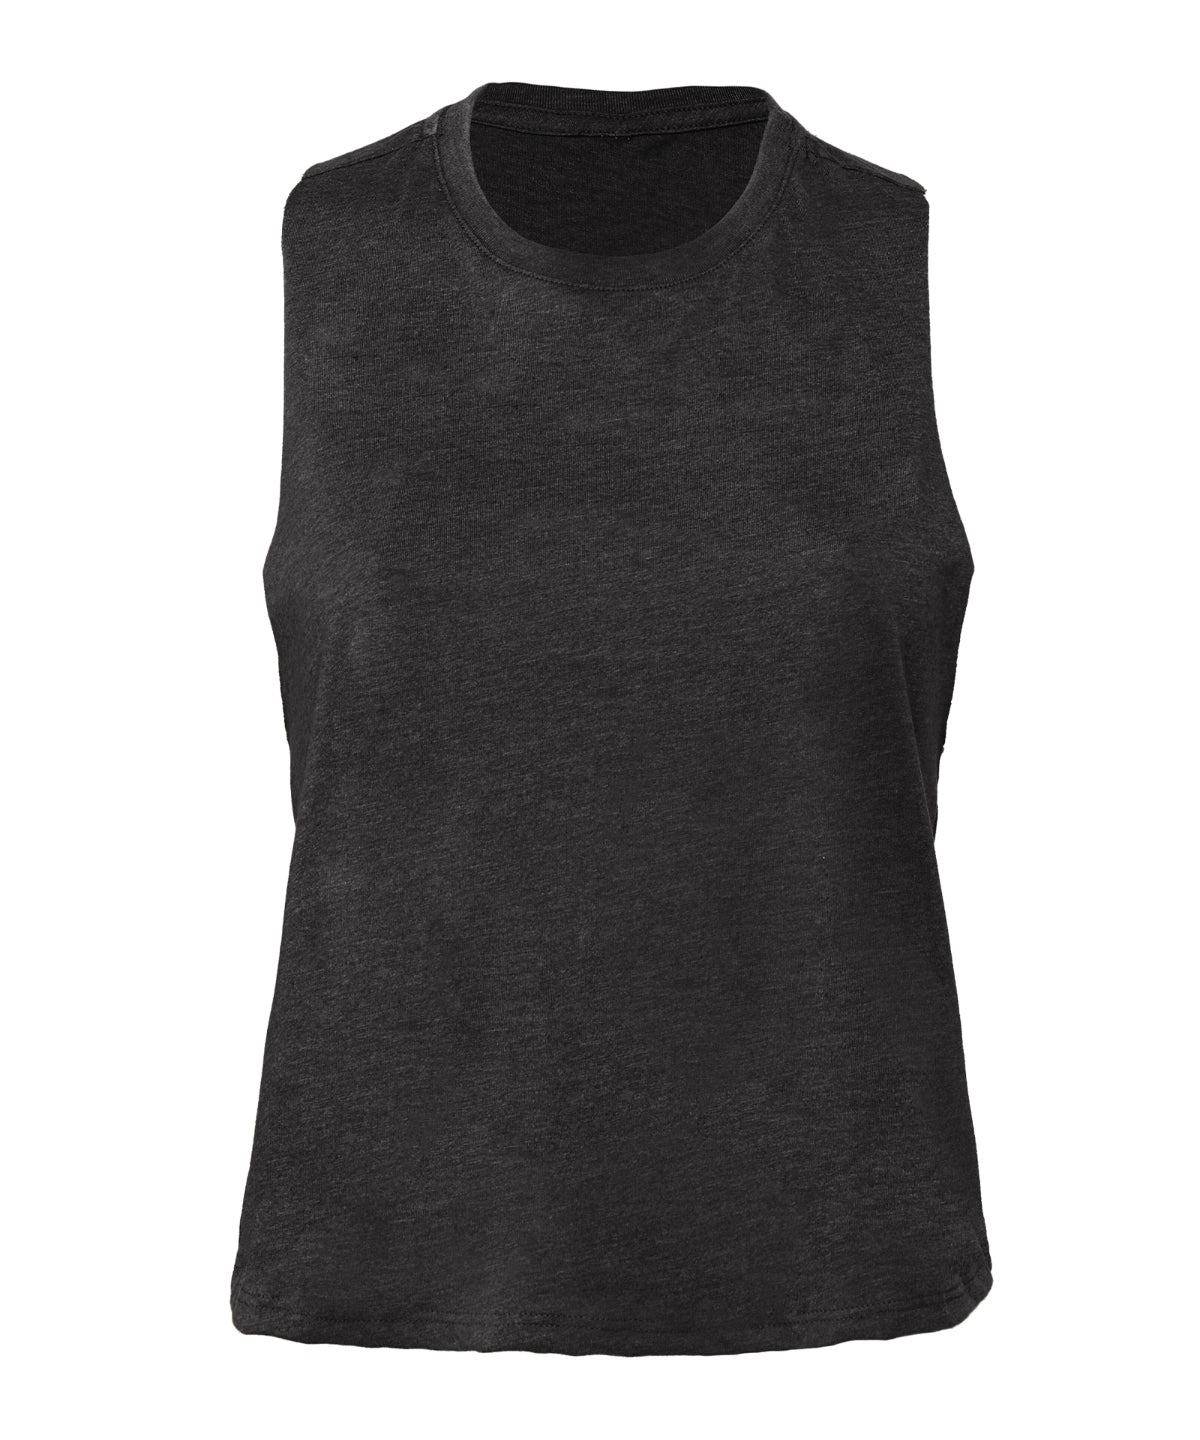 Bella+Canvas BE6682 Women's Racerback Cropped Tank Raw edge arm holes - COOZO